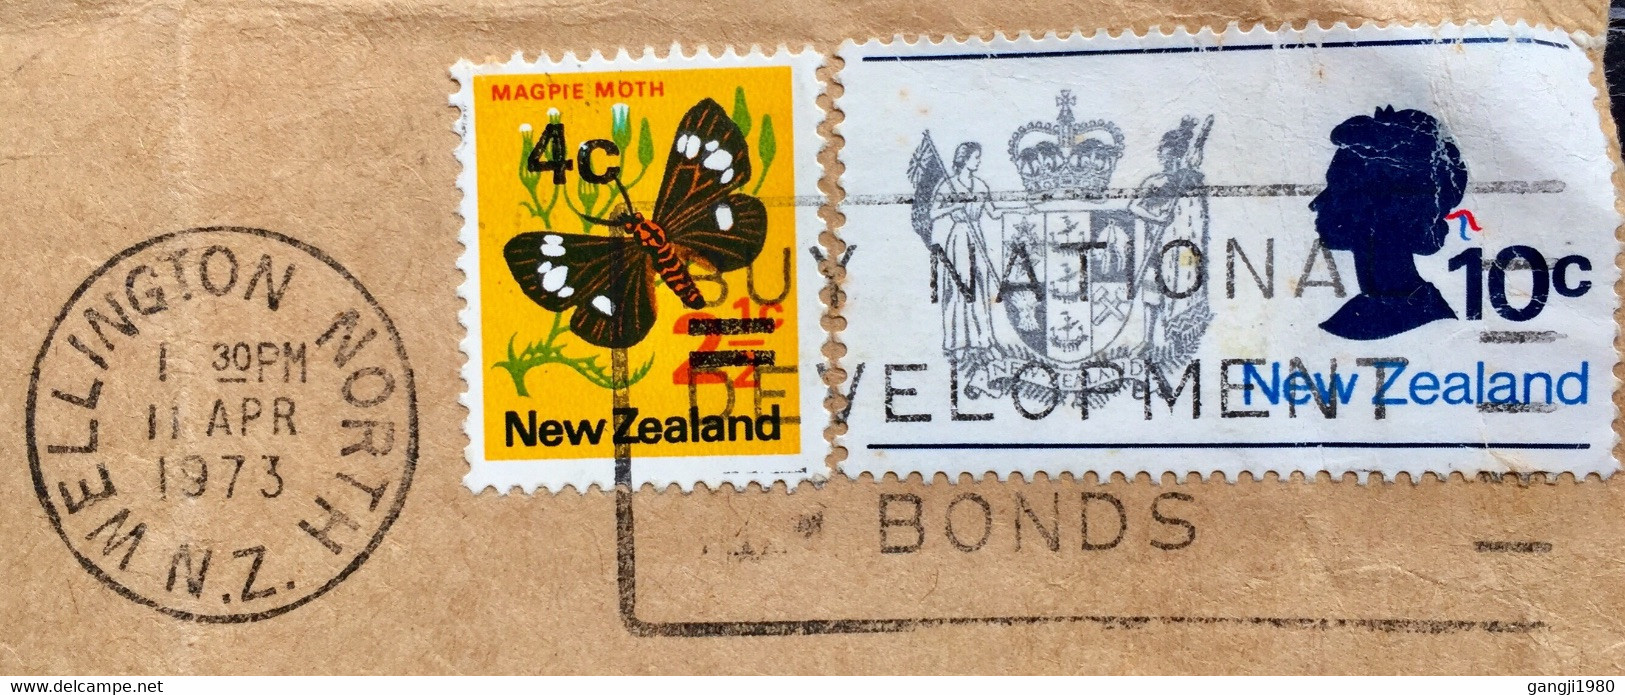 NEW ZEALAND 1973 ,BUY NATIONAL DEVELOPMENT BONDS SLOGAN,EMBASSY OF INDONESIA,USED COVER BUTTERFLY,EAGLE,QUEEN - Covers & Documents